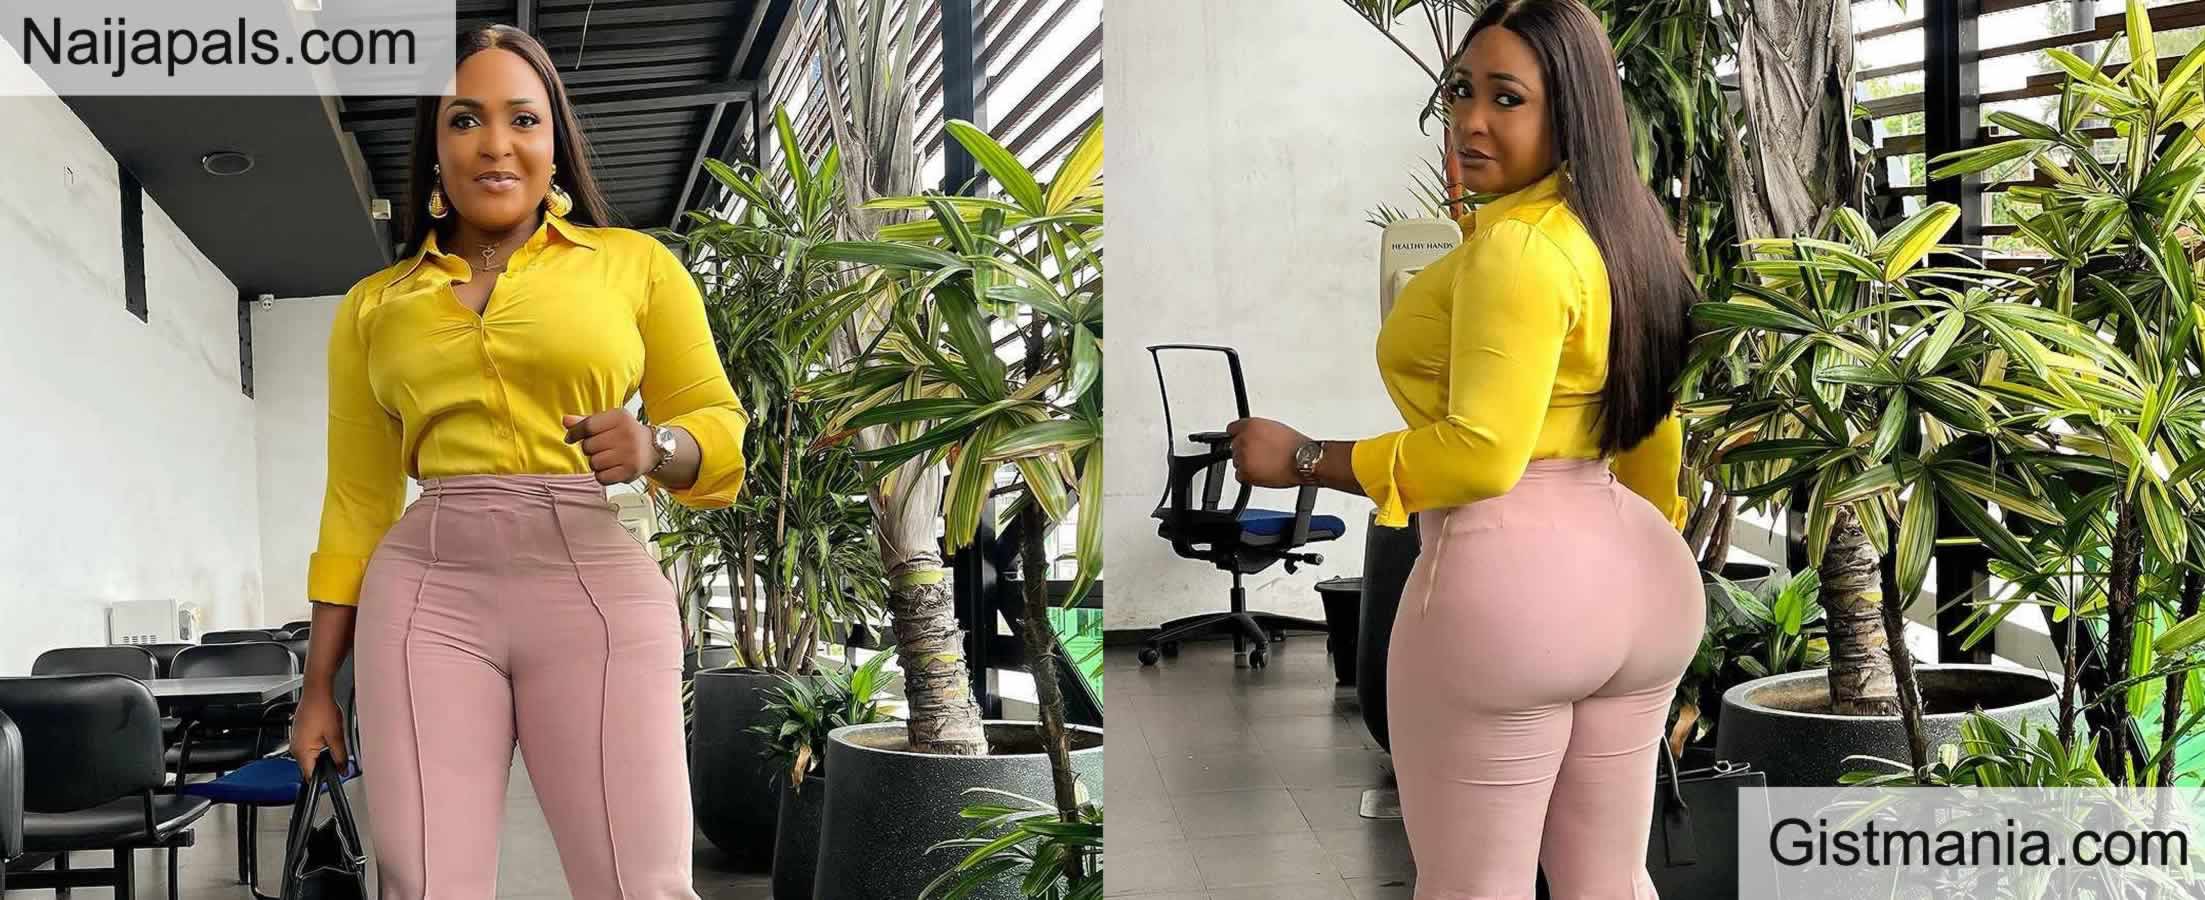 “Once You Leave Responsibilities For Woman, Expect Her To Cheat” – Blessing CEO Tells Men